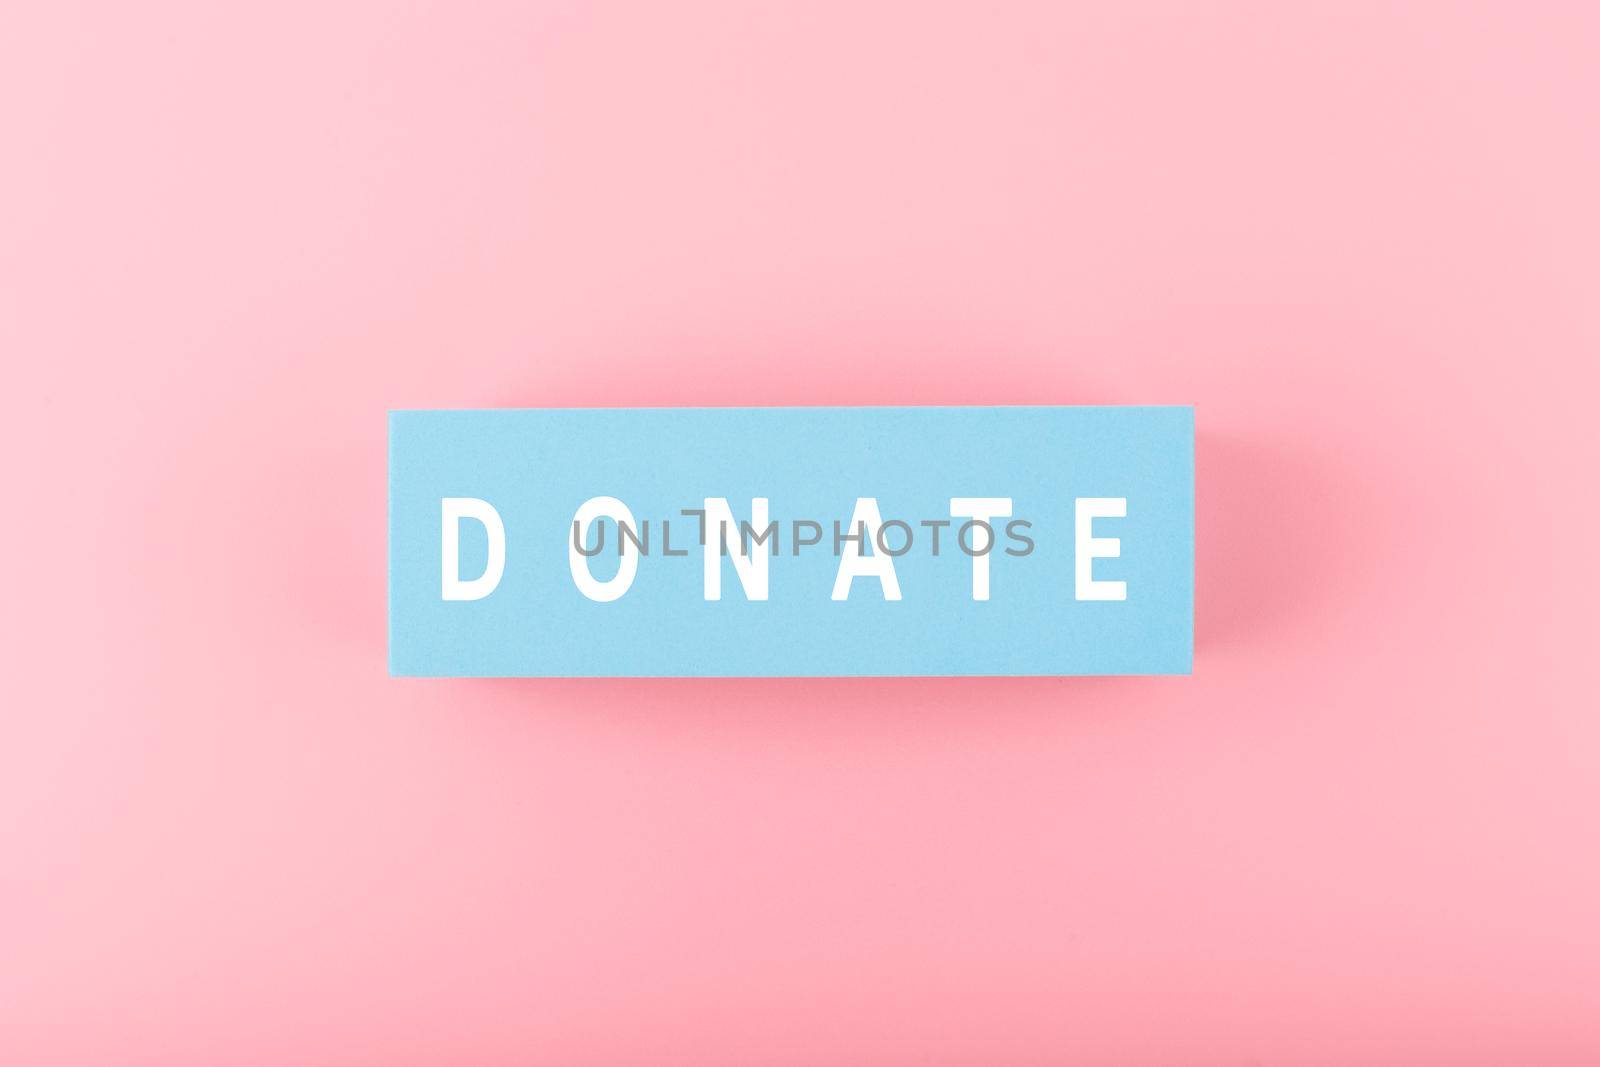 Donation or charity modern minimal concept. Single word donate written on light blue block against bright pink background. 